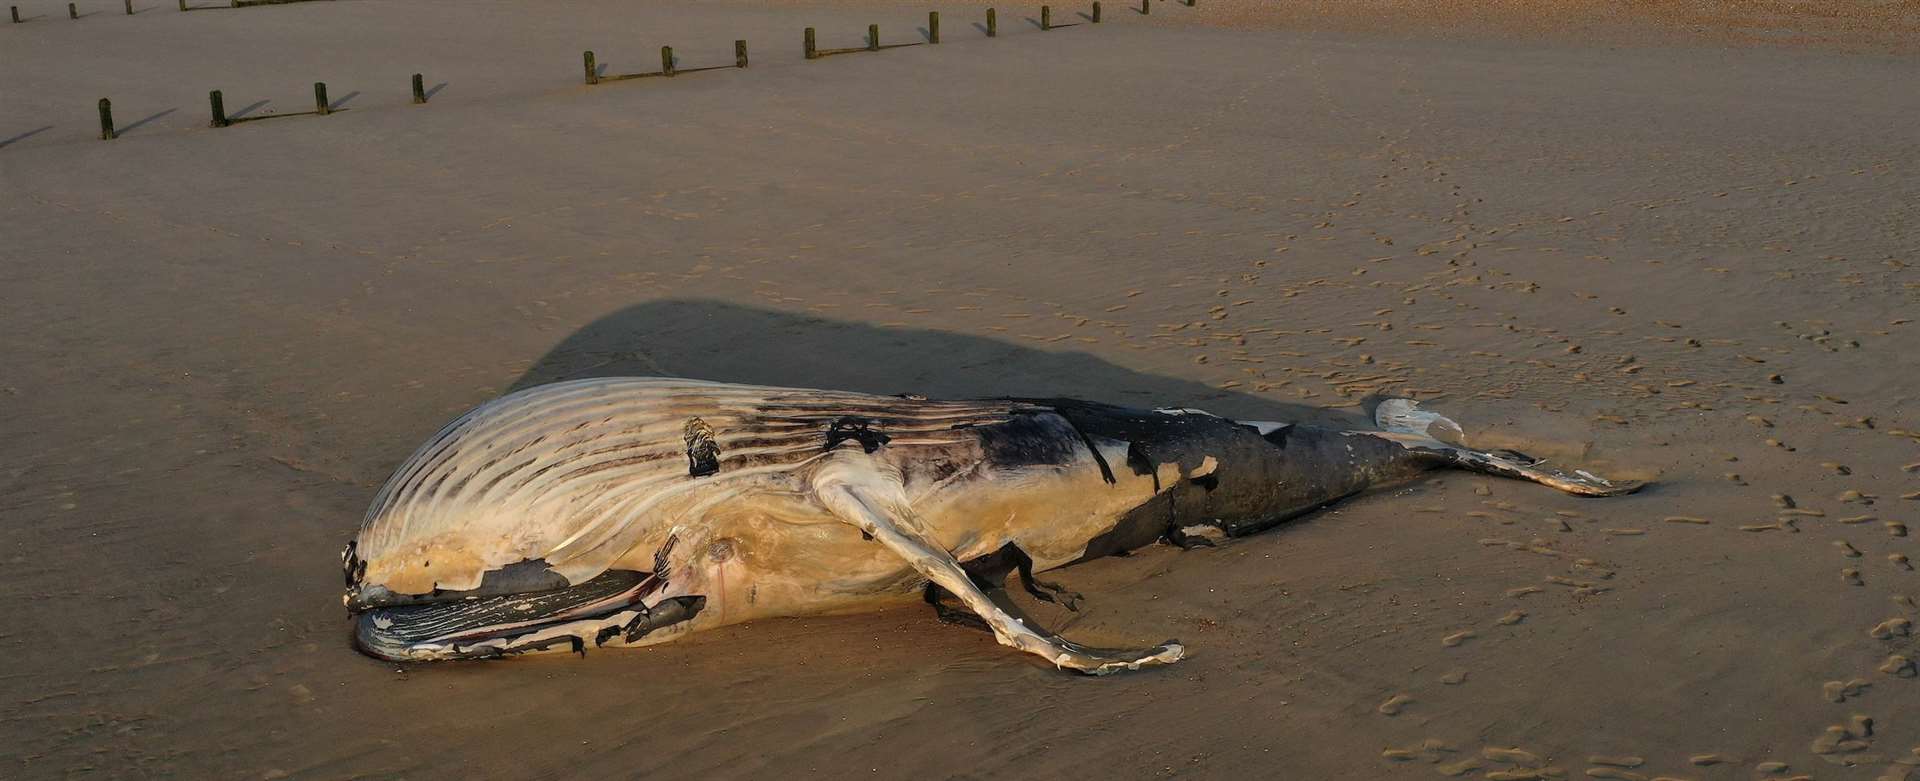 The coastguard have asked people to steer clear of the whale. Picture: UKNIP